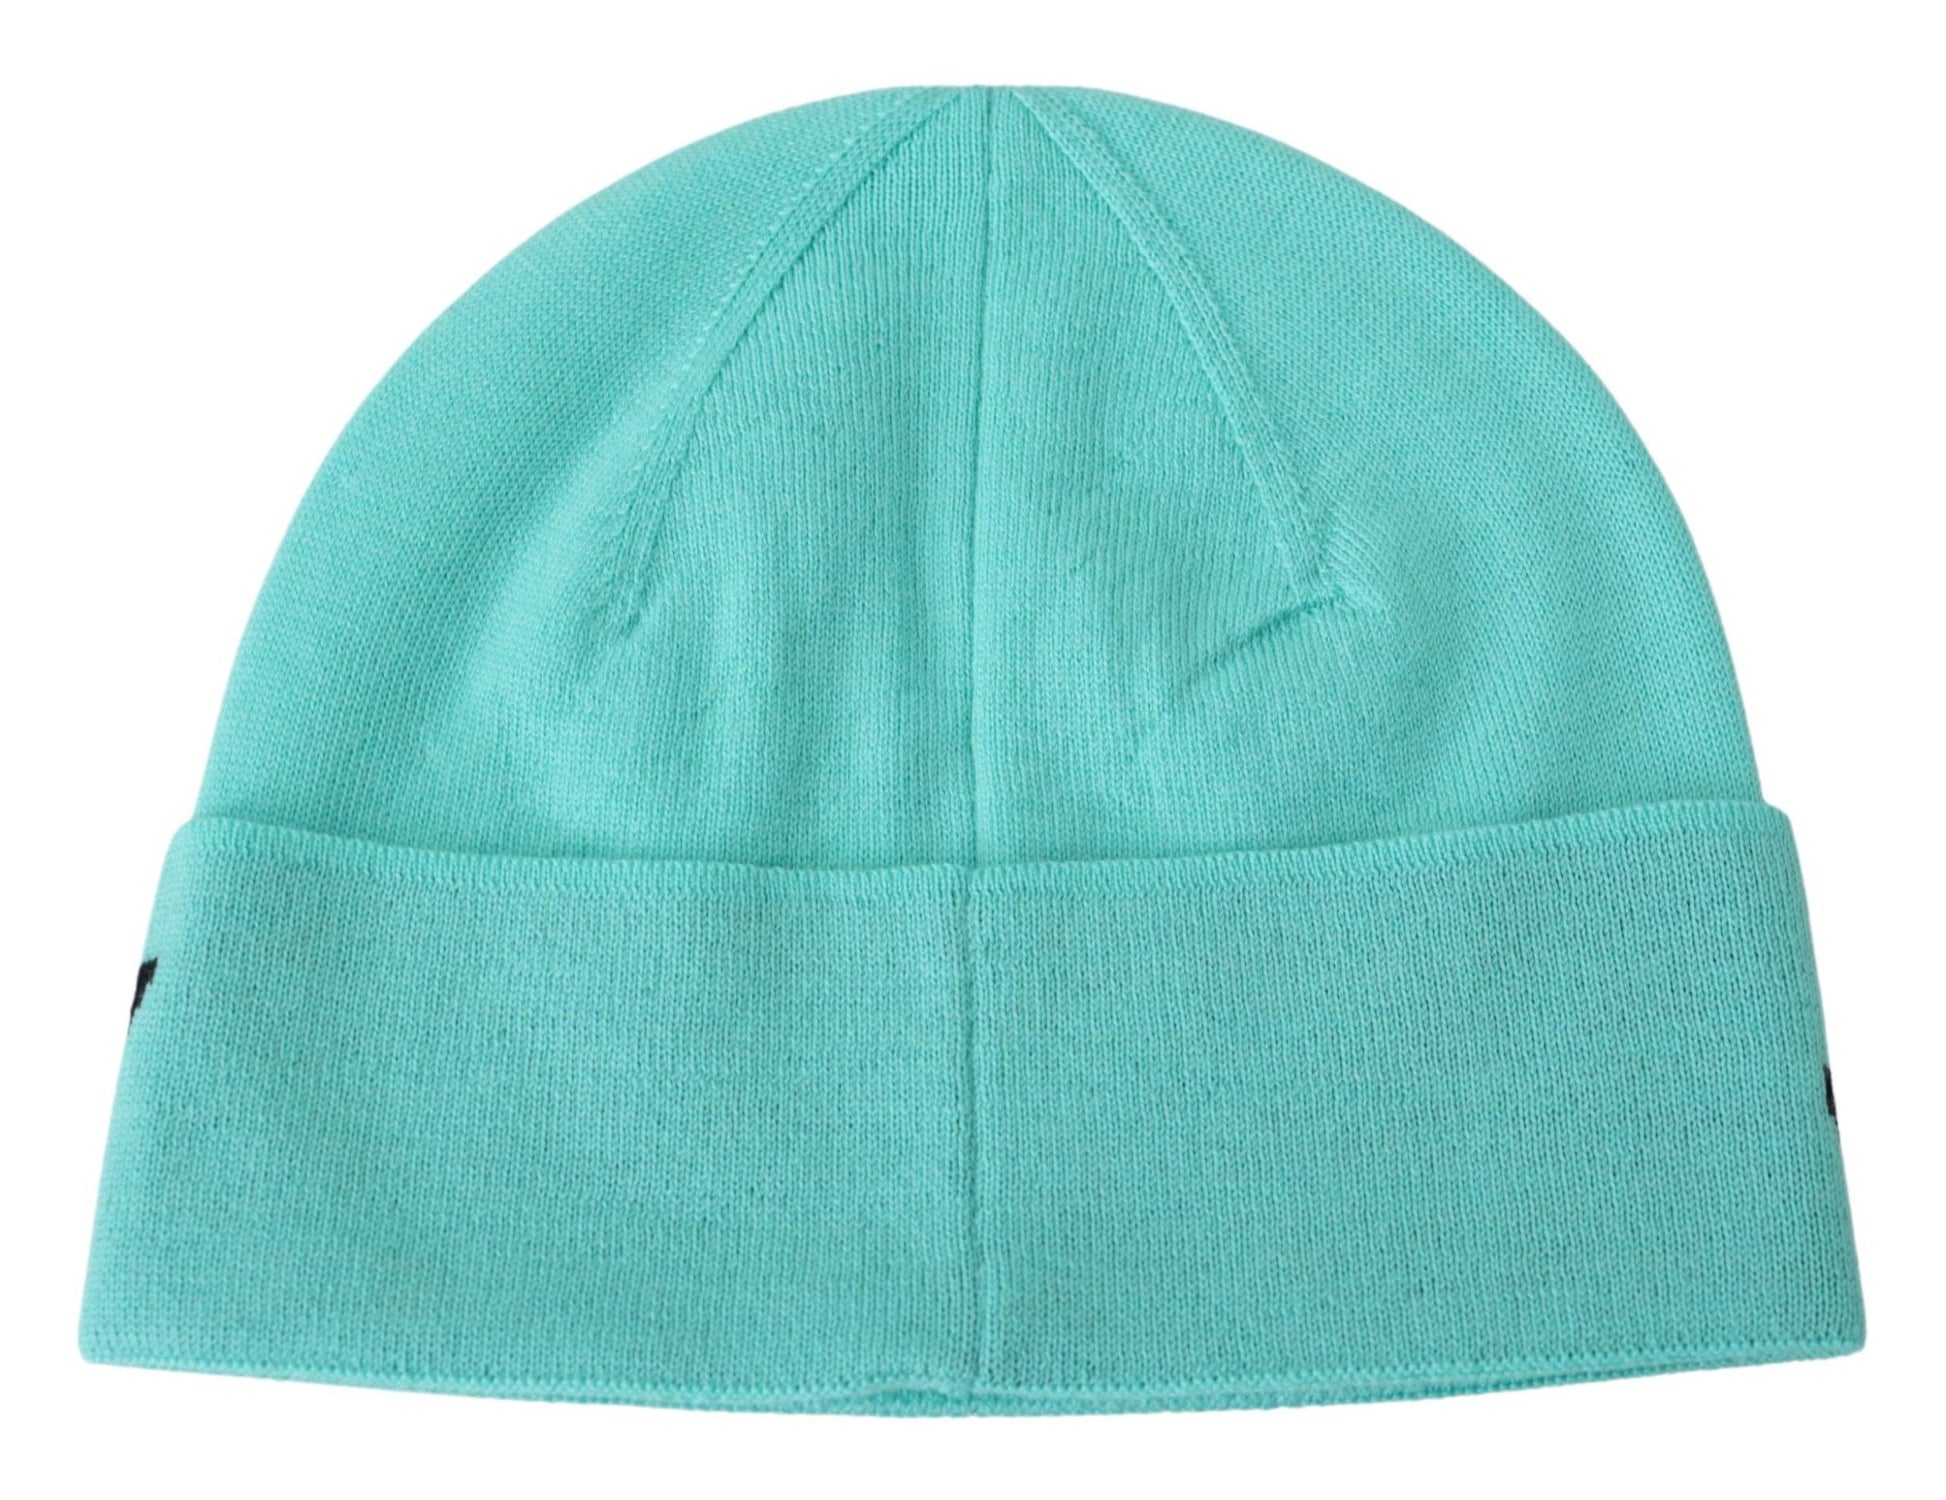 Givenchy Green Wool Beanie Unisex Logo Hat - Designed by Givenchy Available to Buy at a Discounted Price on Moon Behind The Hill Online Designer Discount Store